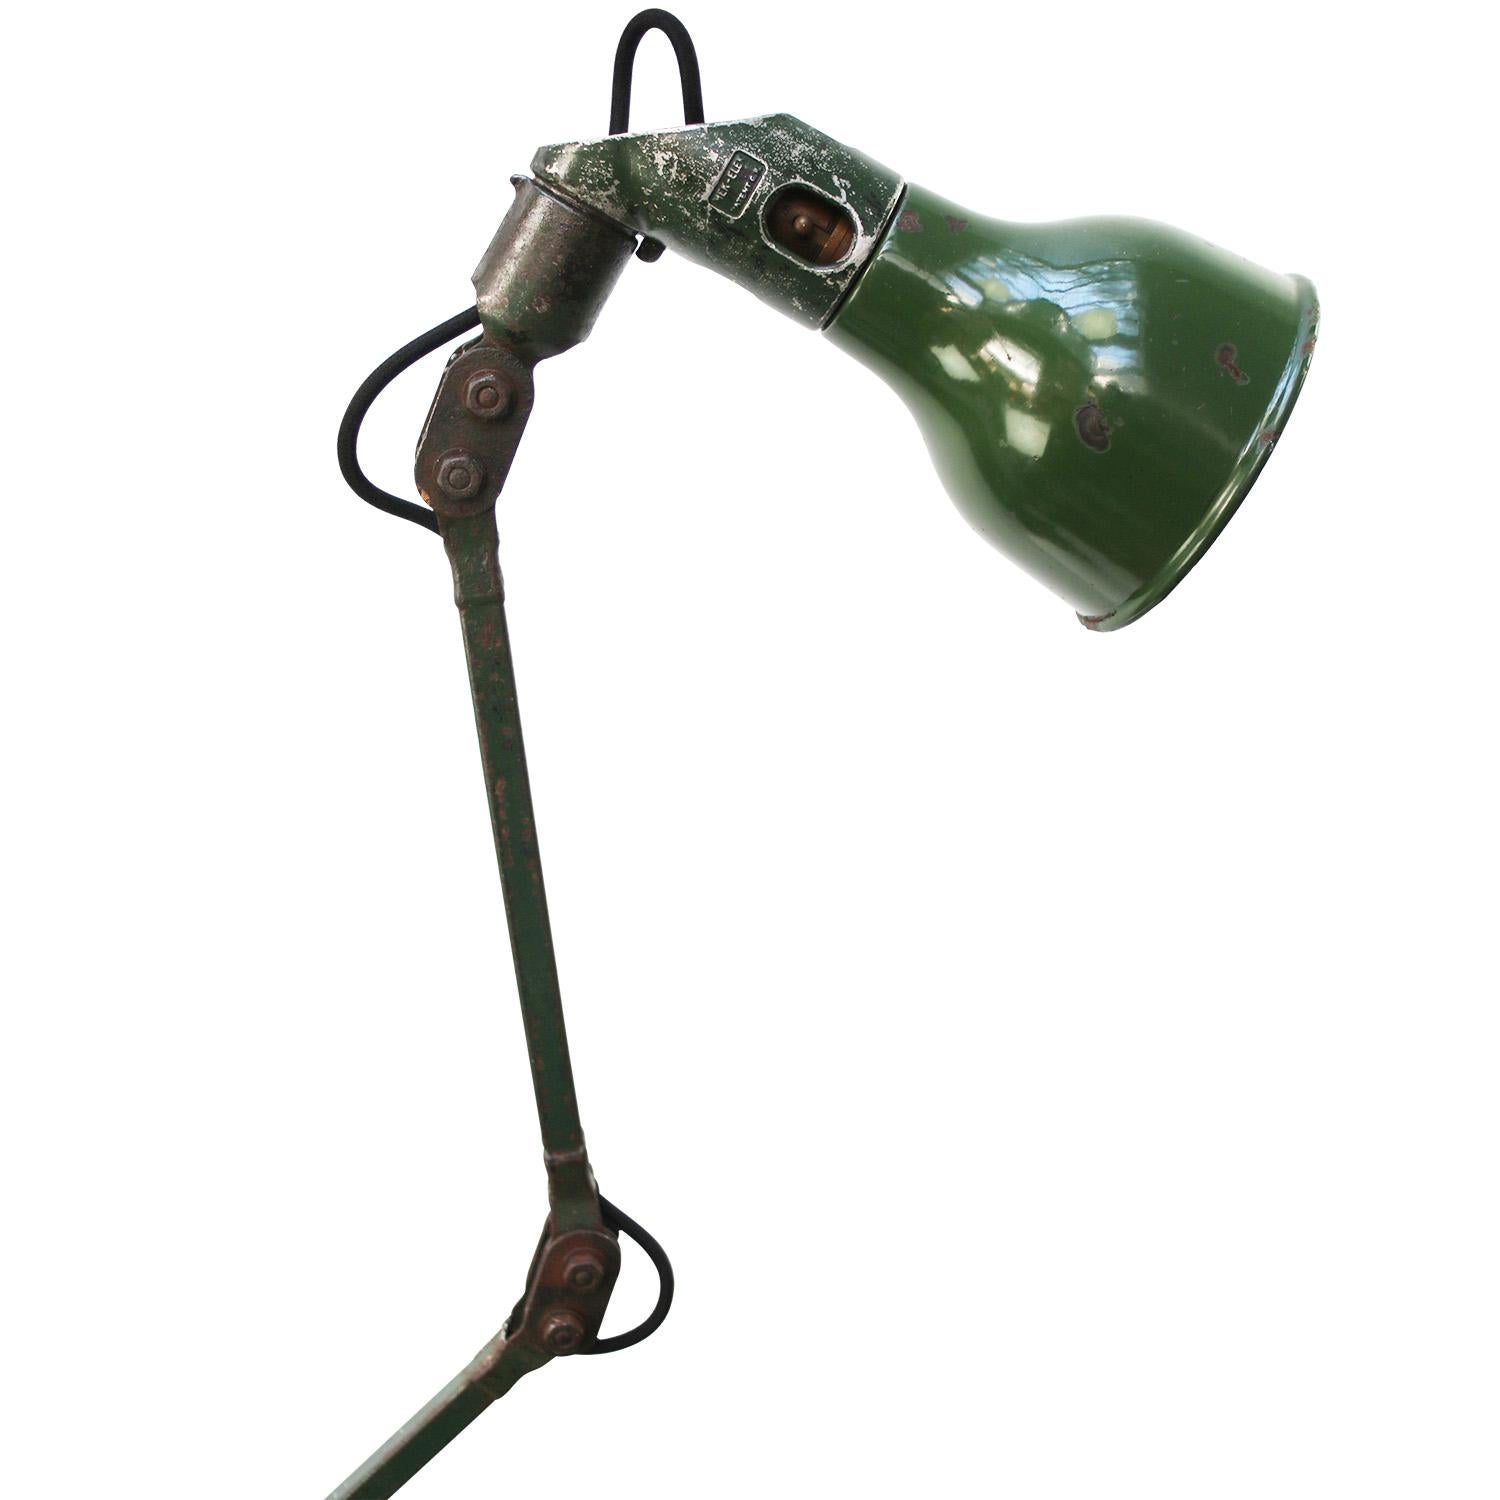 1930s Green enamel, cast iron industrial 2 arm machinist work light by MEK ELEK, UK
adjustable in height and angle
including plug and switch

Diameter base 13.5 cm

B22 bulb holder

Weight: 4.00 kg / 8.8 lb

Priced per individual item. All